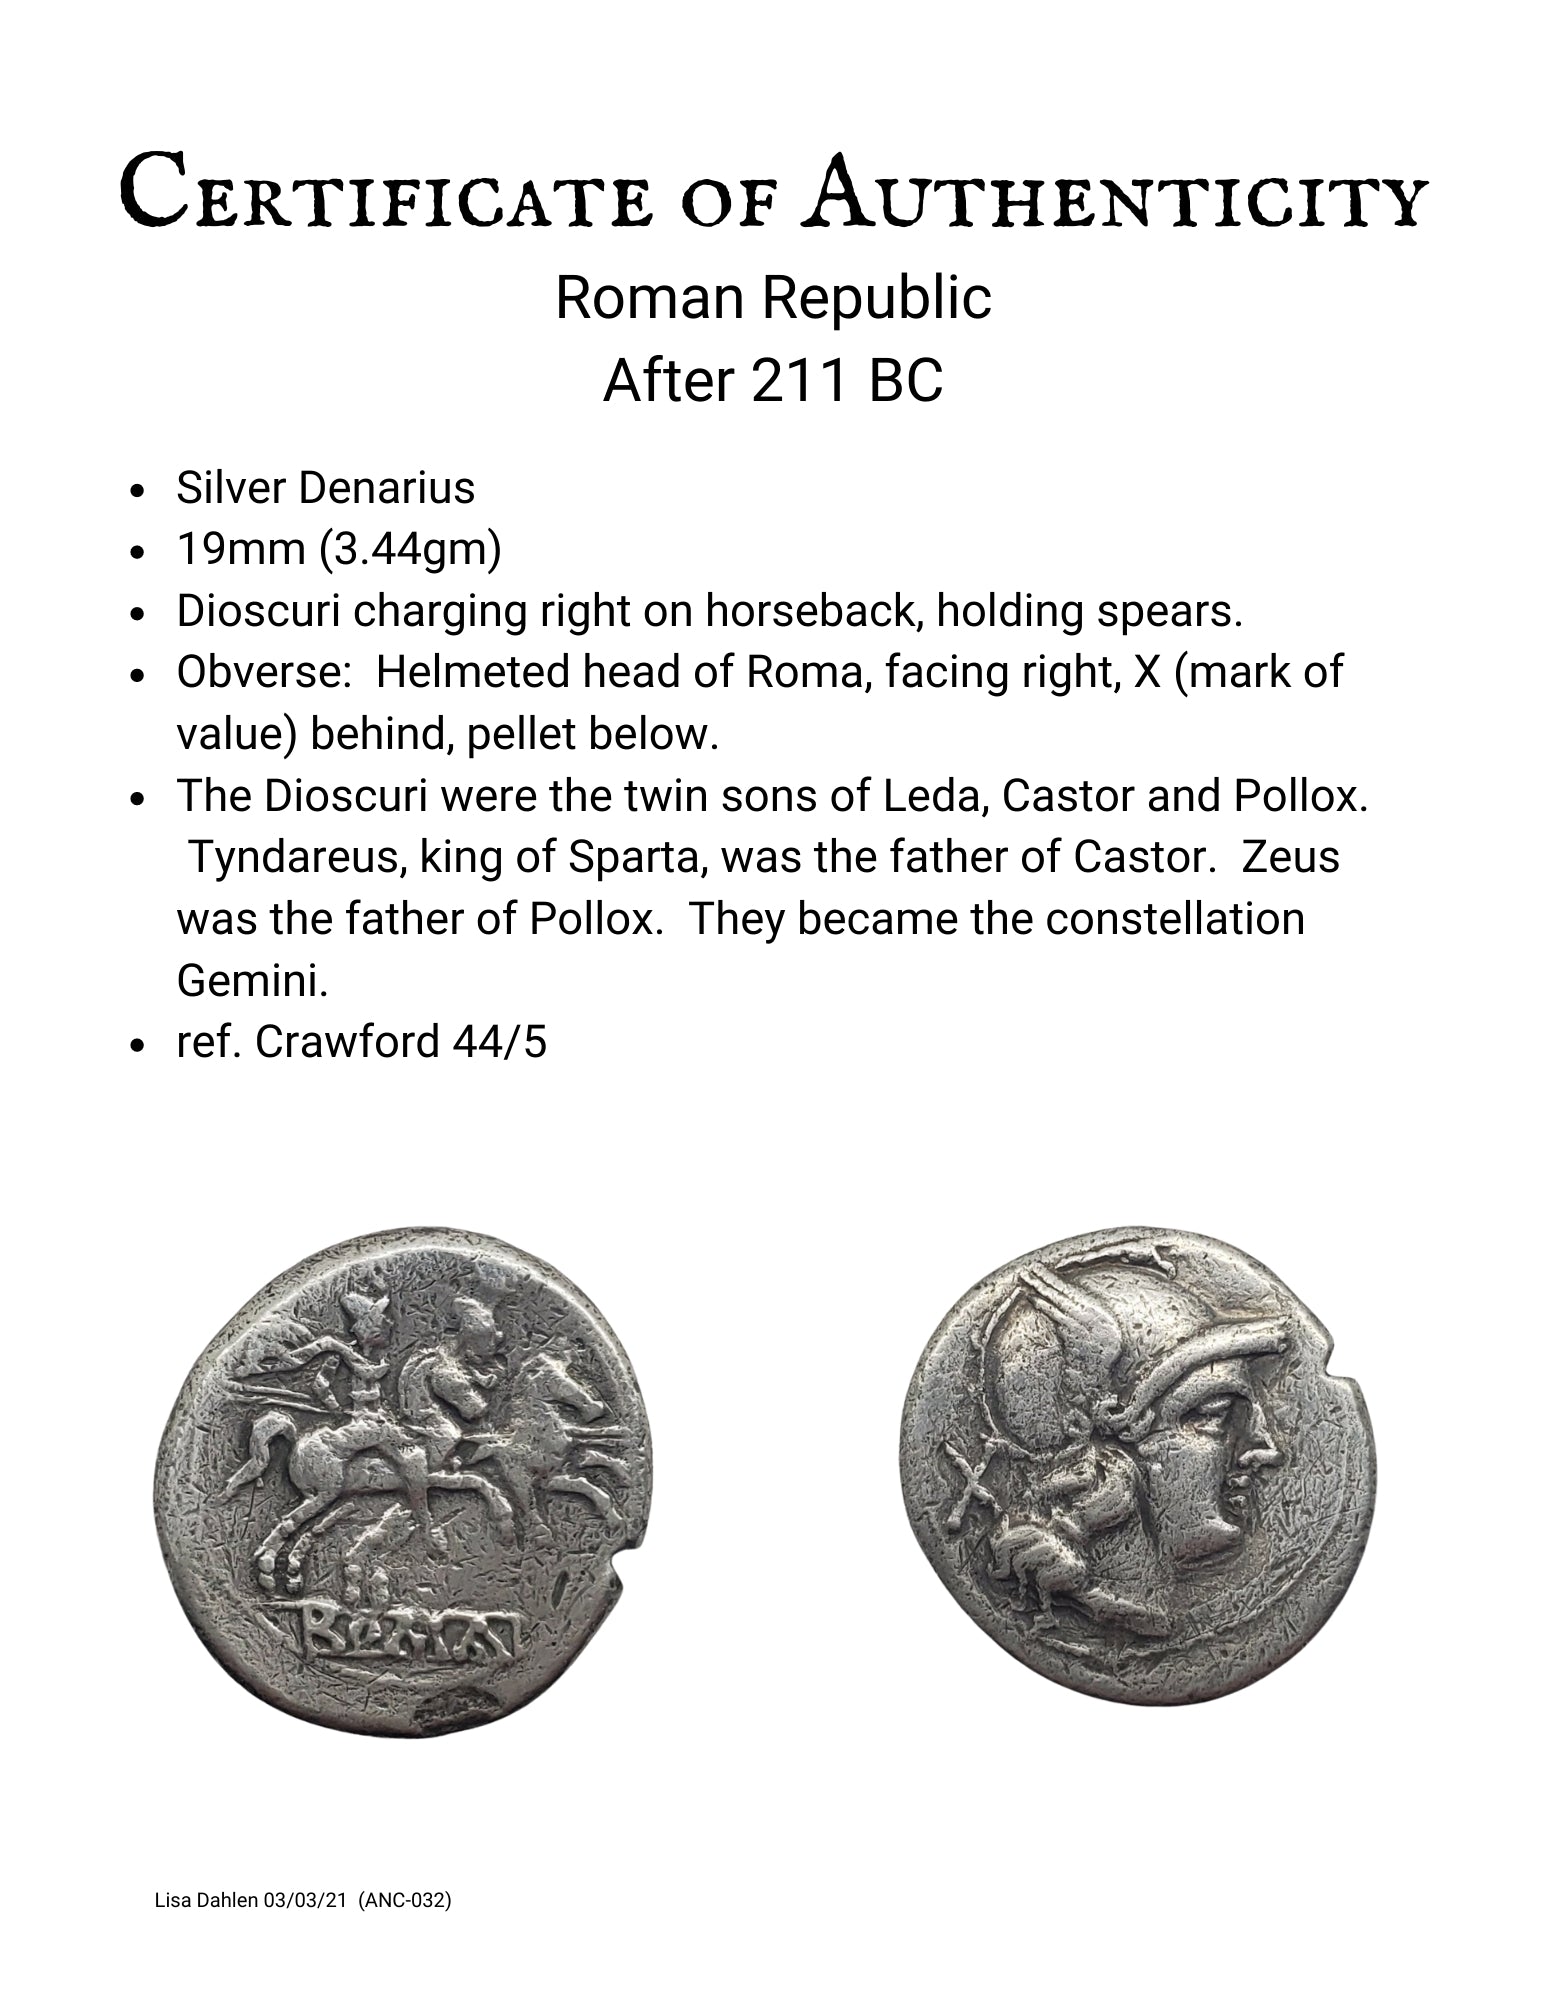 Ancient Roman Republic Silver coin with Dioscuri and Roma certificate